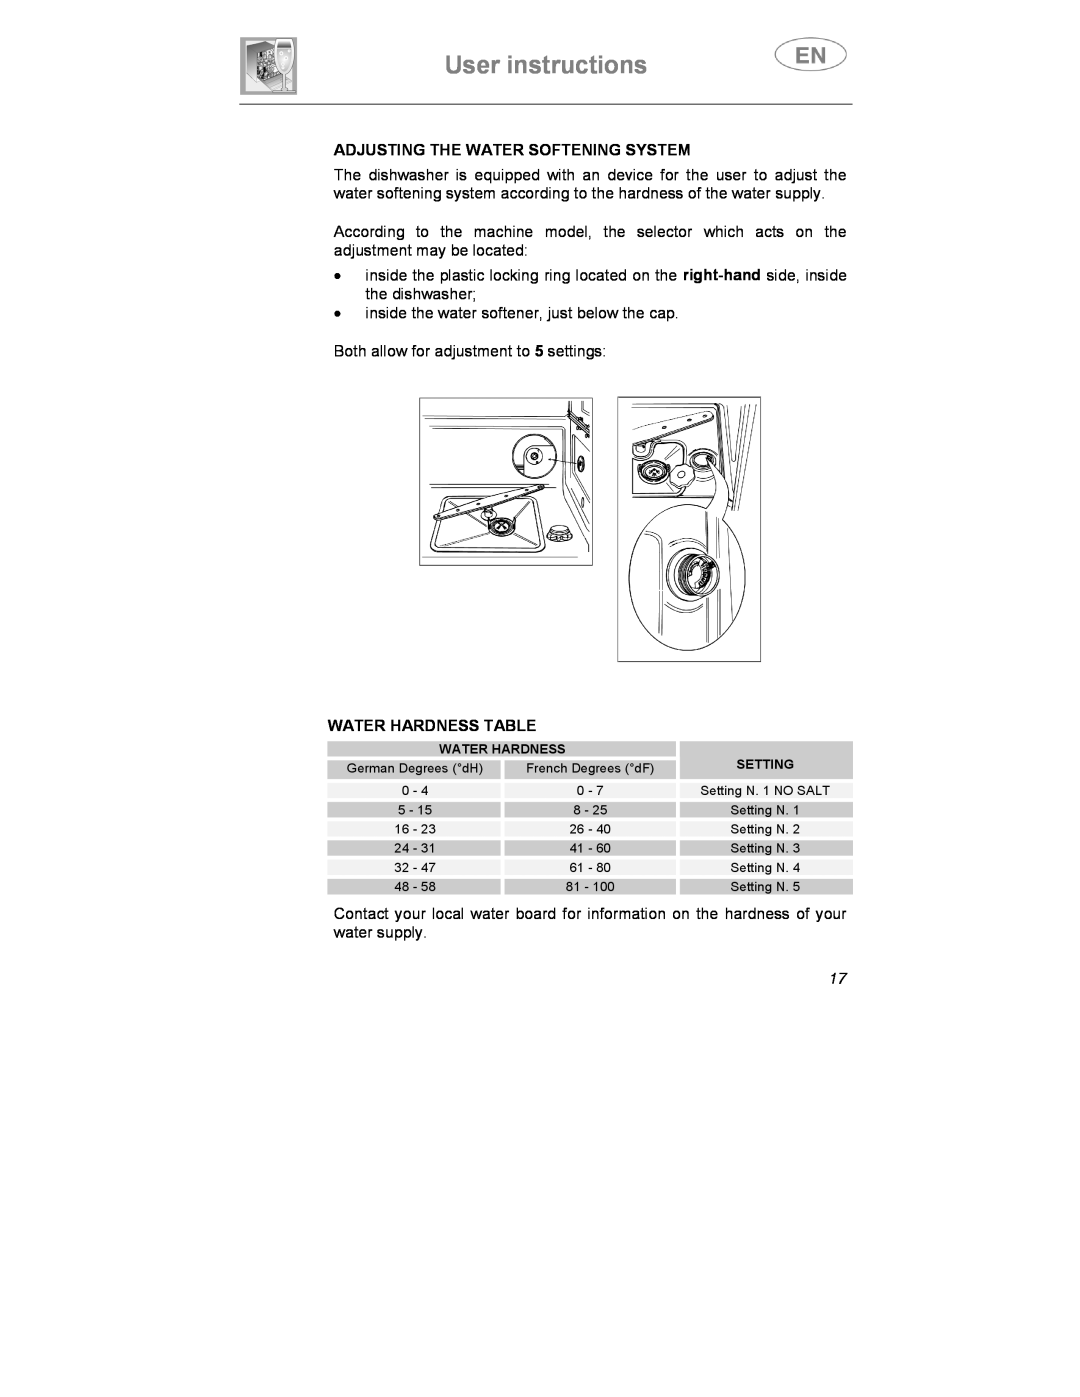 Smeg SDCY66X1, SDCY66-1 instruction manual User instructions, Adjusting The Water Softening System, Water Hardness Table 